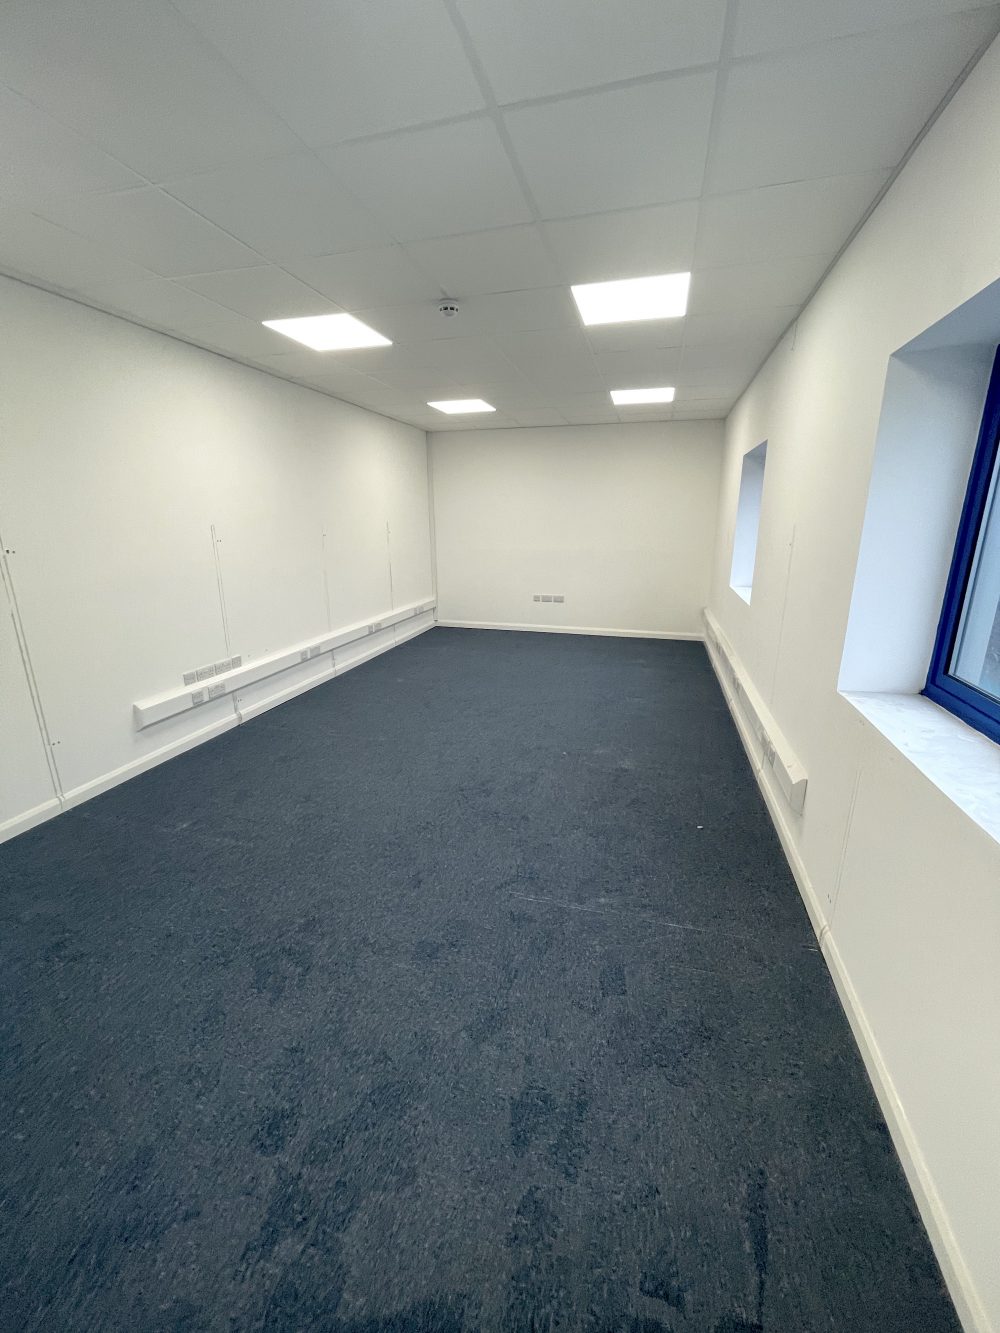 First floor office space : light idustrial creative artist studio to rent in E18 S South Woodford Pic 7